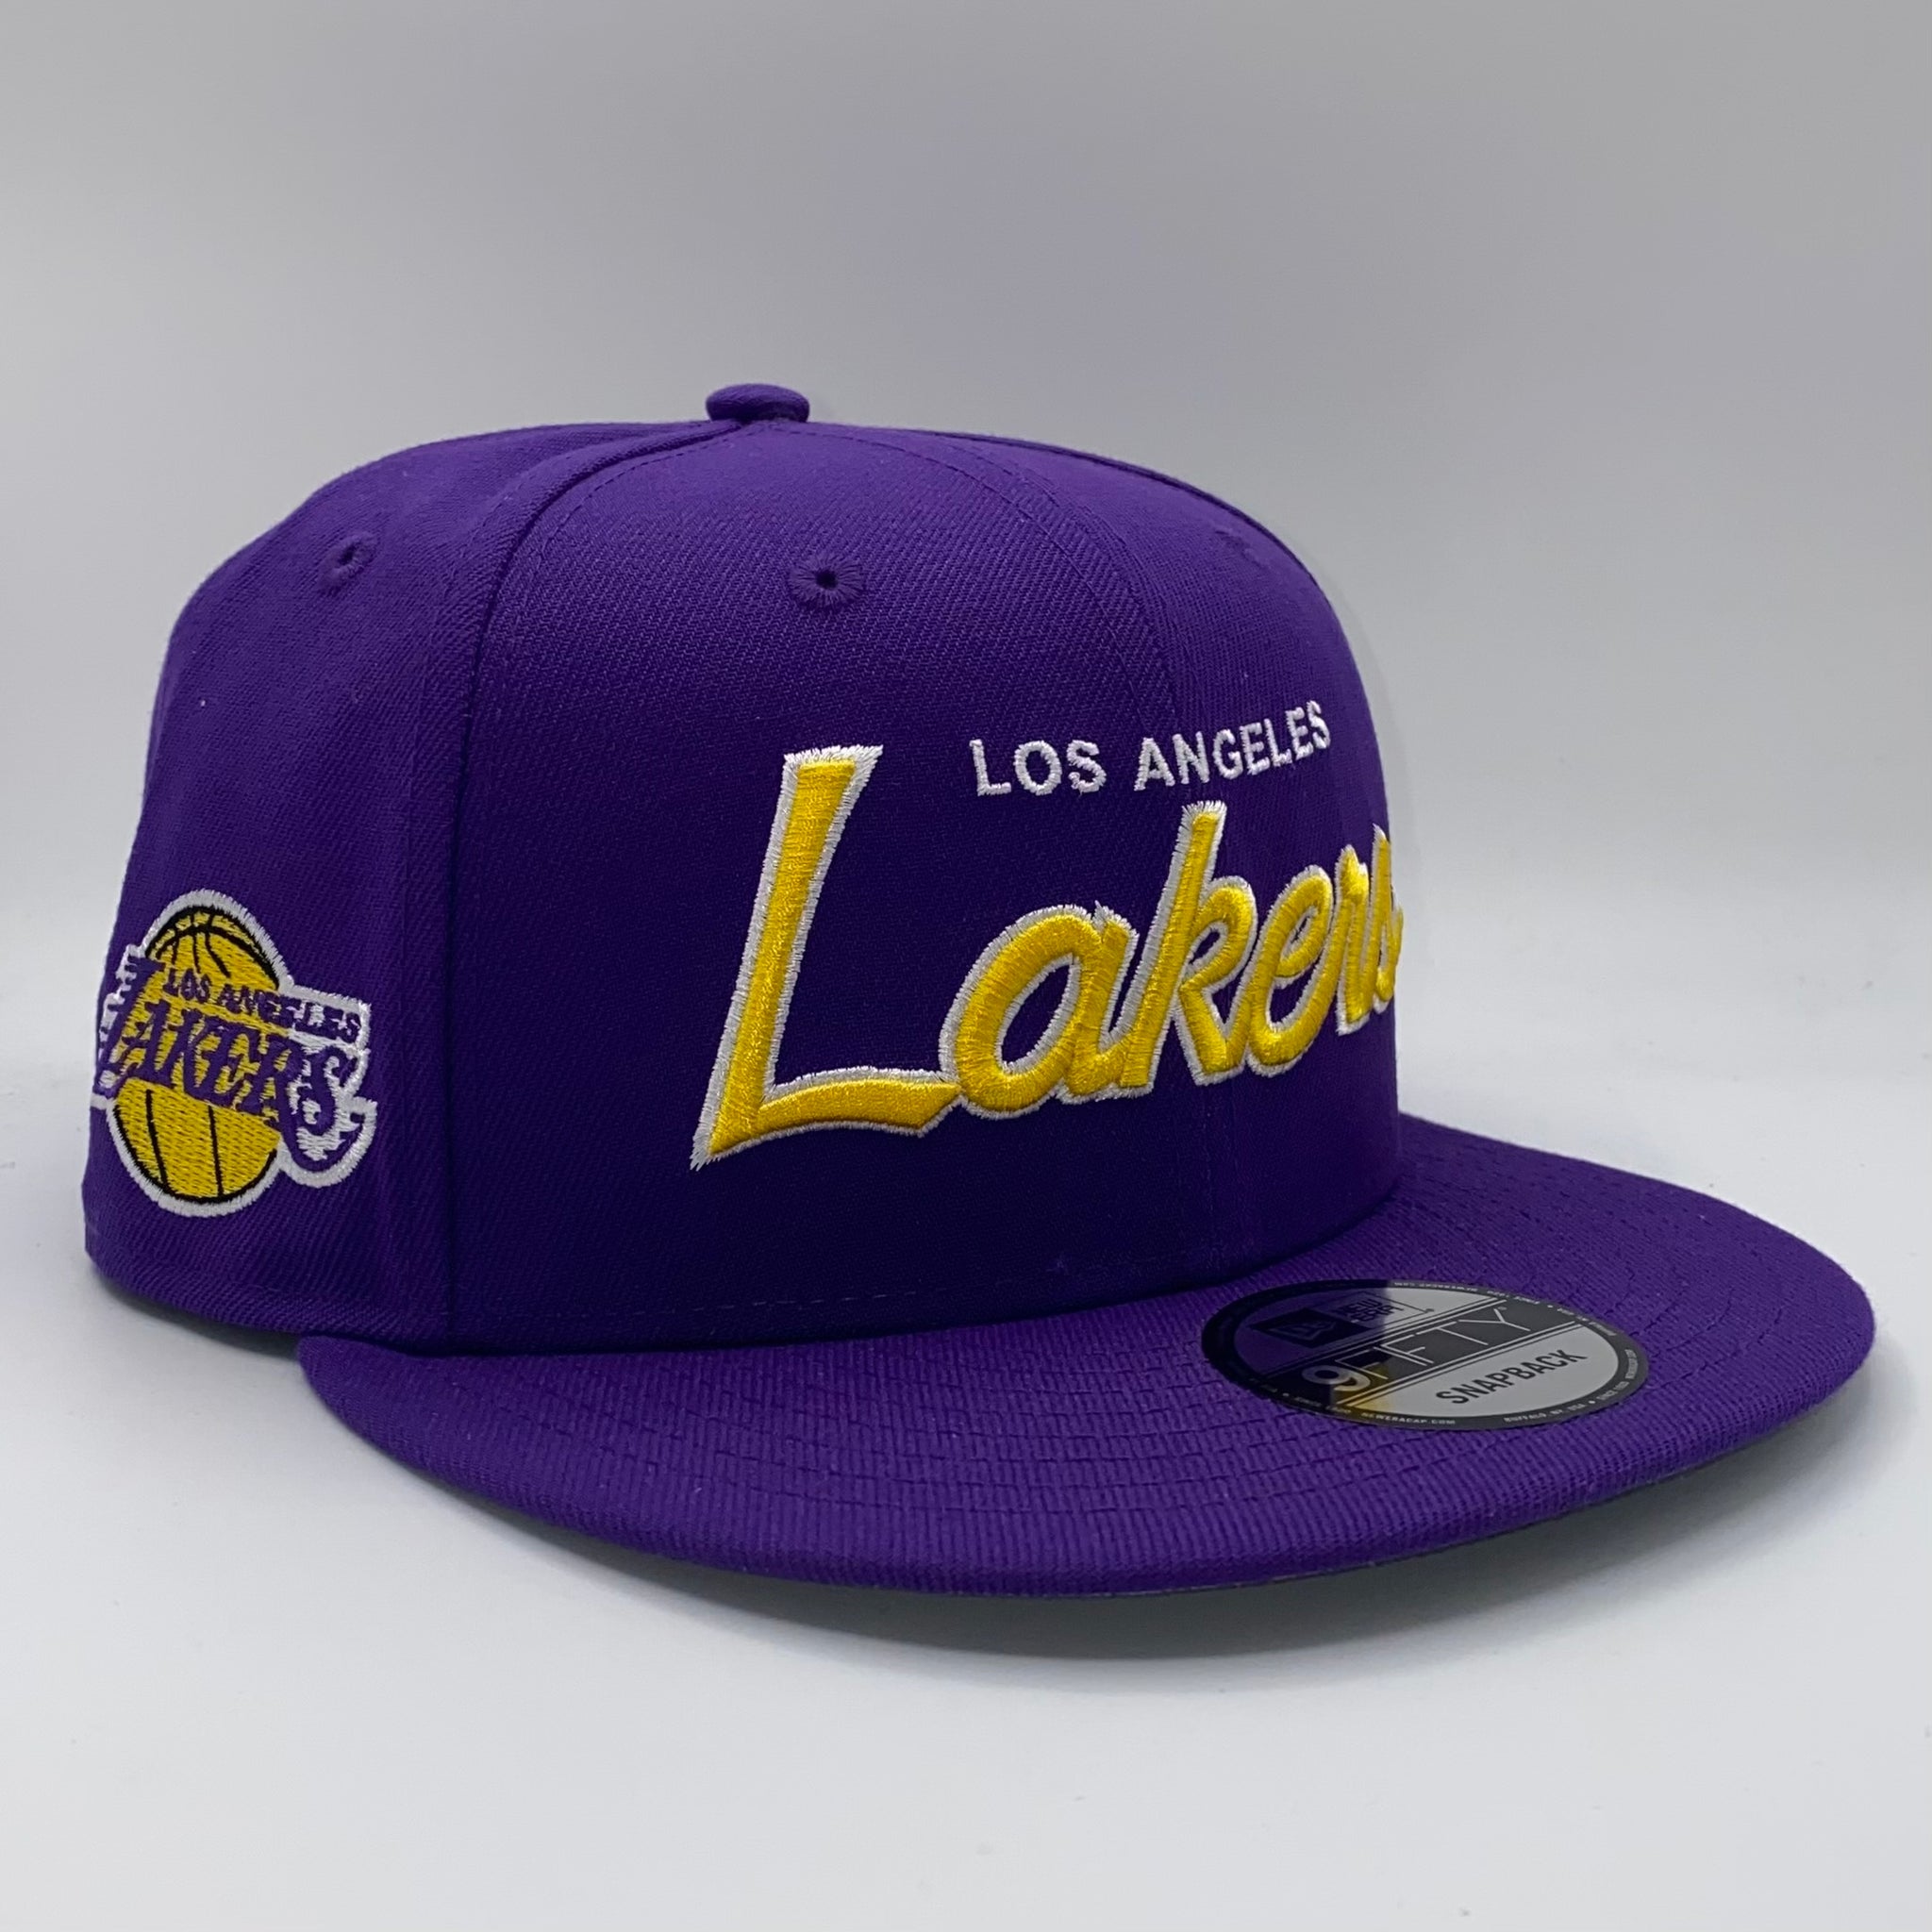 Los Angeles Lakers Evergreen Script 9FIFTY Snapback